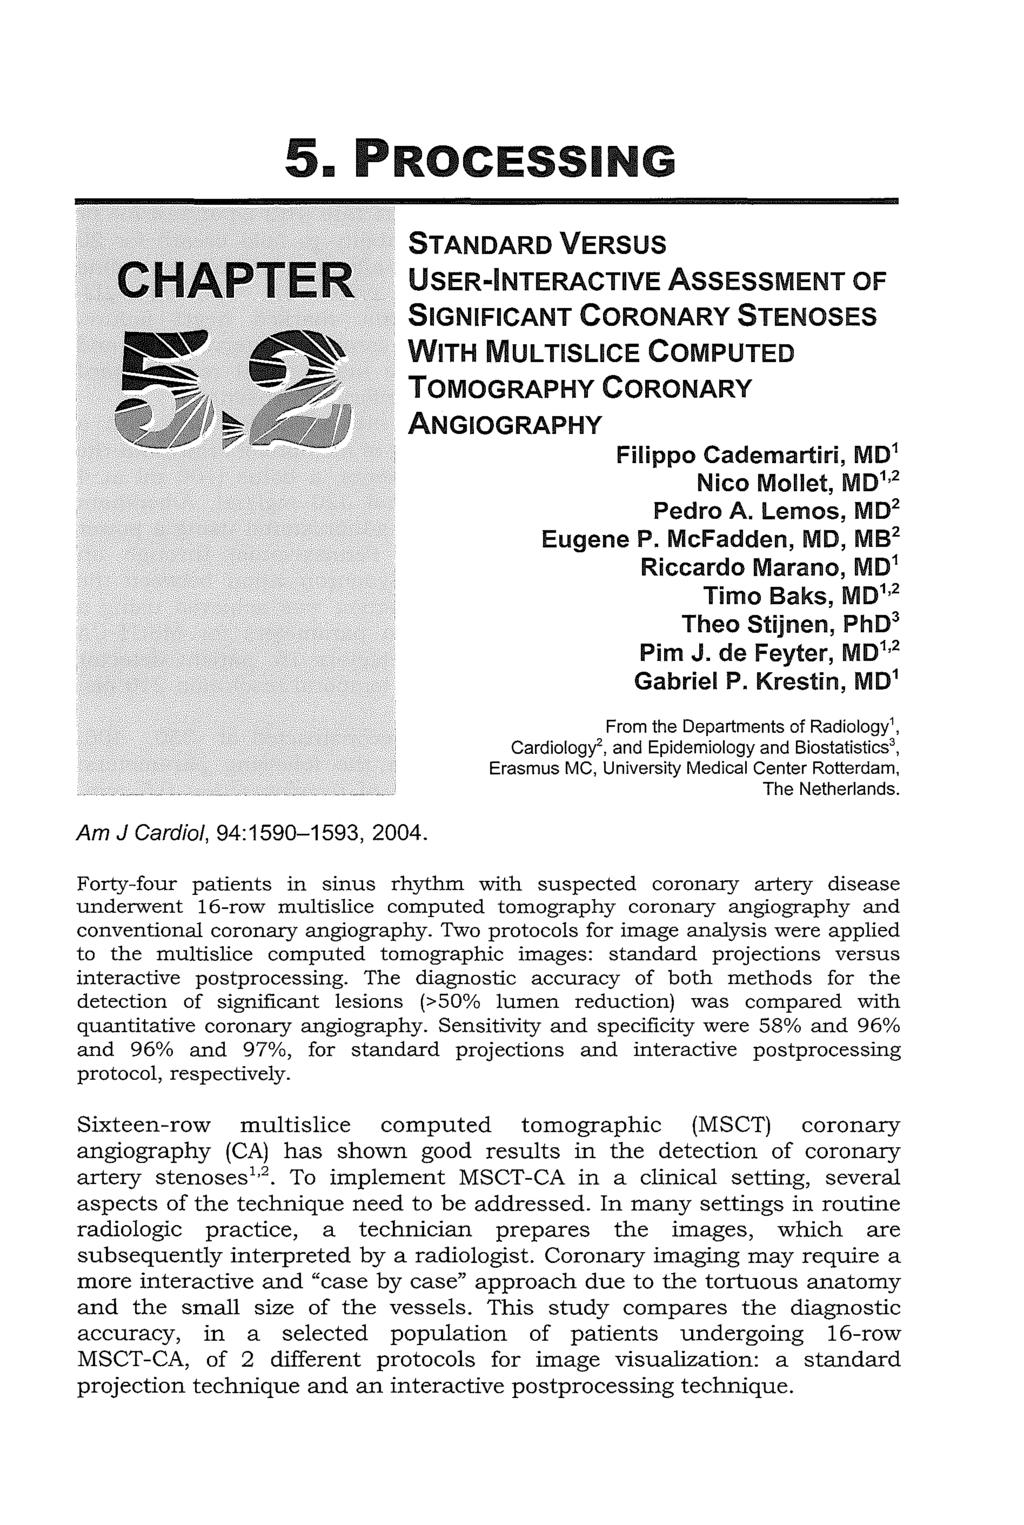 5. PROCESSING CHAPTER STANDARD VERSUS USER-INTERACTIVE ASSESSMENT OF SIGNIFICANT CORONARY STENOSES WITH MUL TISUCE COMPUTED TOMOGRAPHY CORONARY ANGIOGRAPHY Filippo Cademartiri, MD 1 Nico Mollet, MD 1